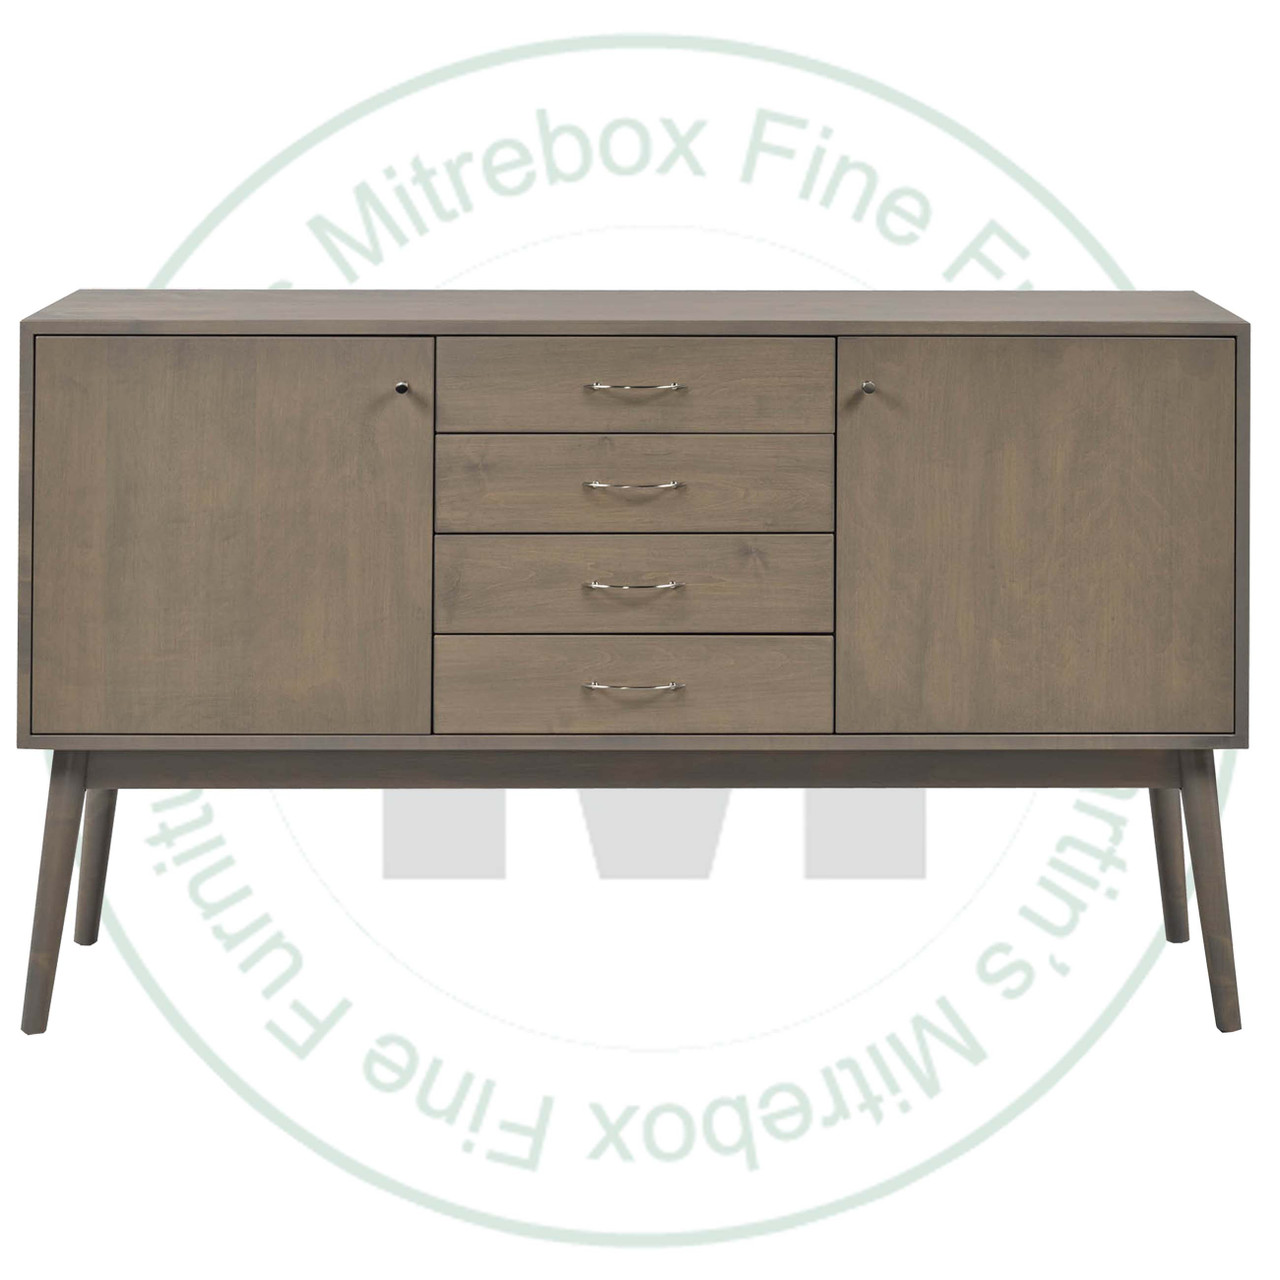 Oak Skalo Sideboard 18''D x 72''W x 36''H With 2 Doors and 4 Drawers